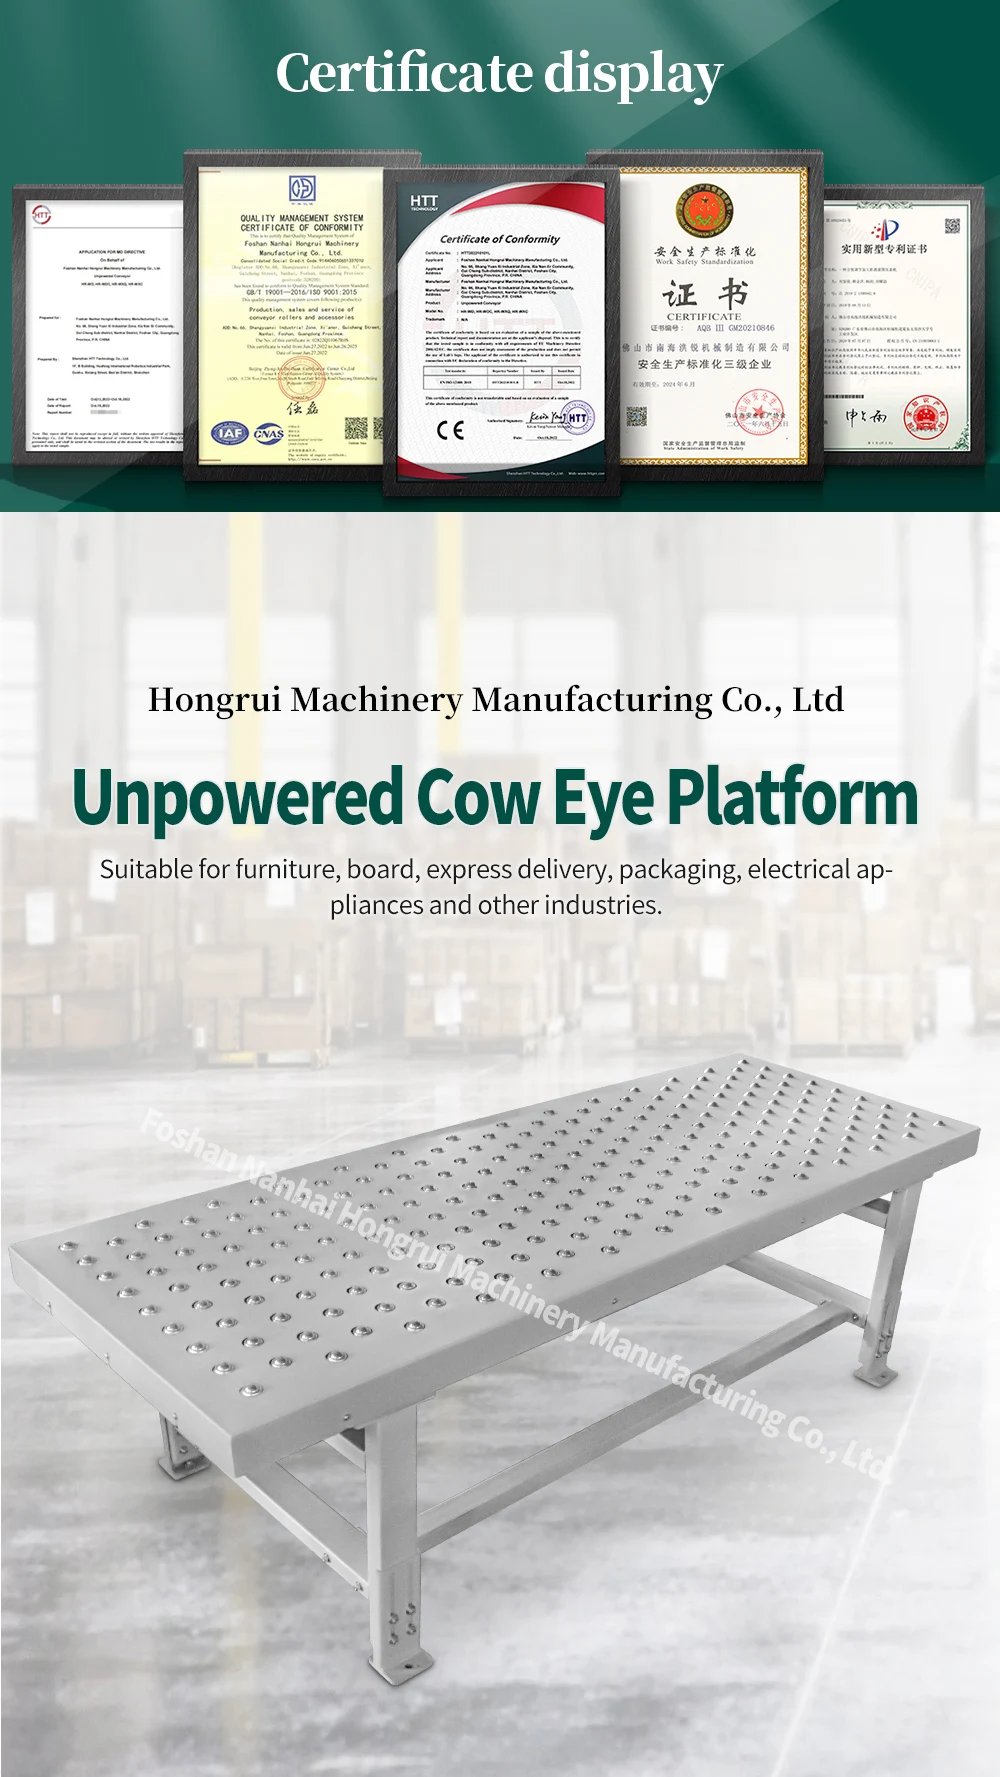 Easy to operate Hongrui unpowered ox eye platform suitable for wood transportation details